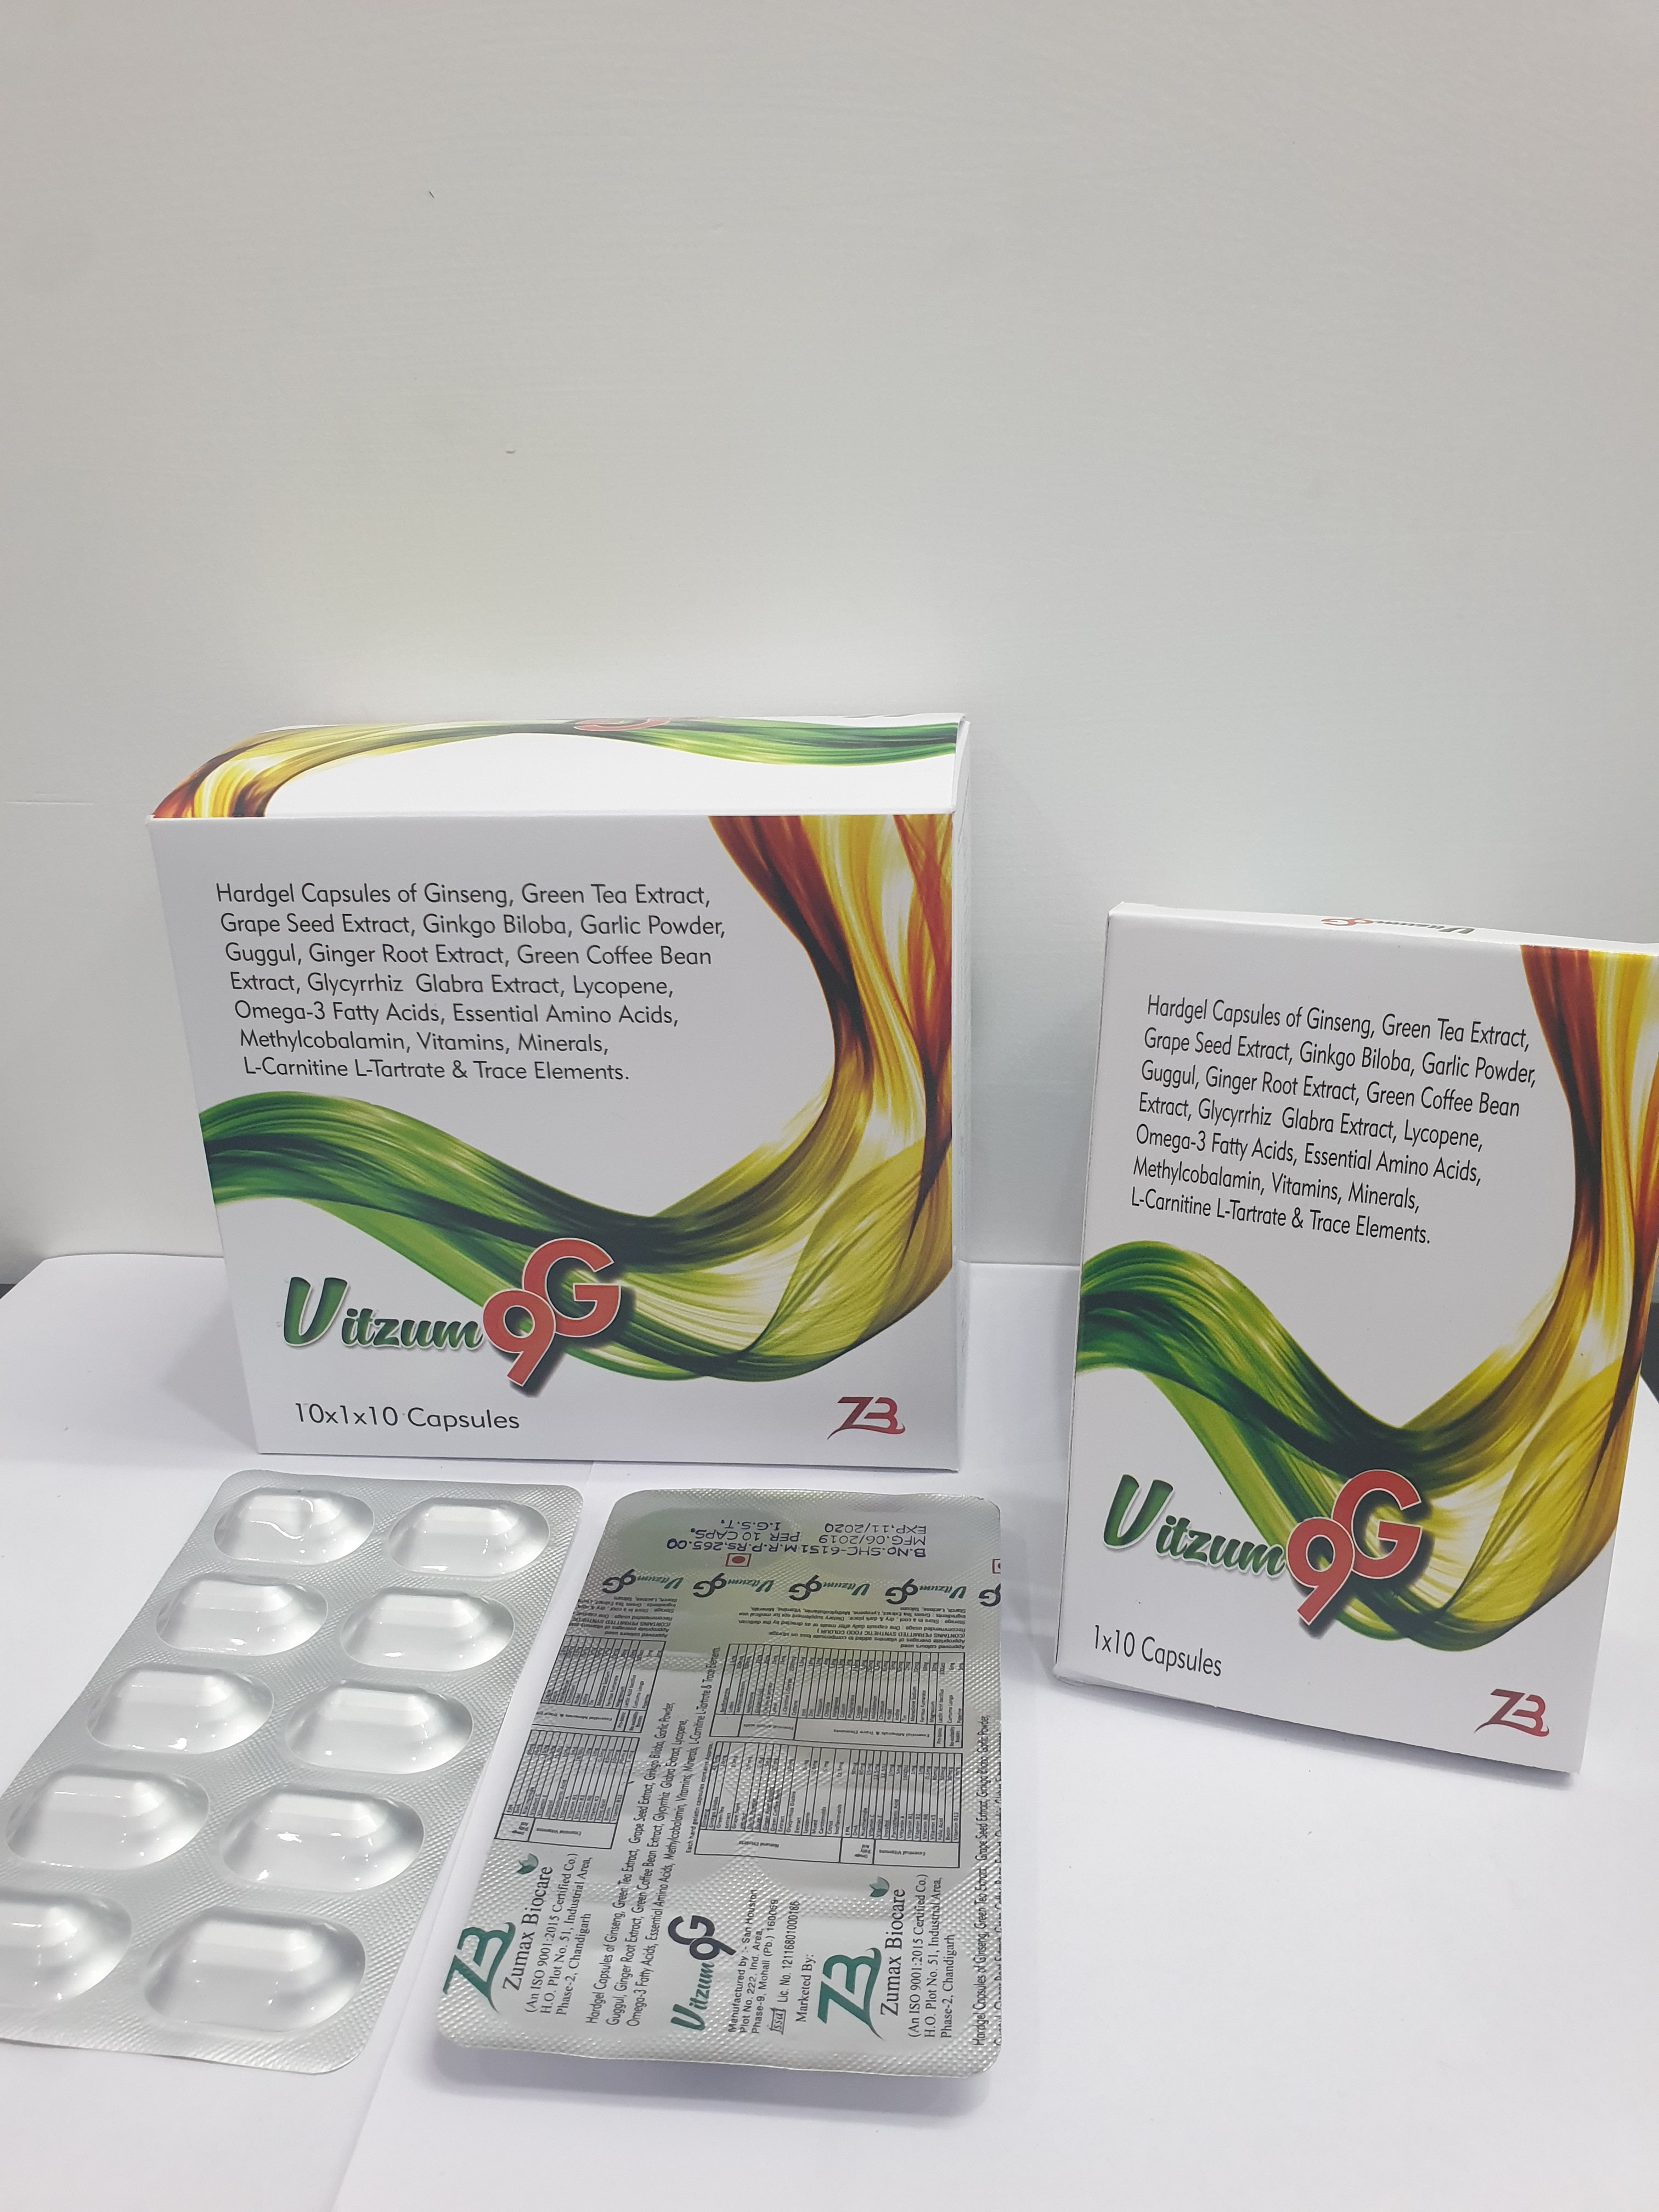 Product Name: Vitzum 9G, Compositions of Hardgel Capsules of  Ginseng , Green Tea Extract, Grape Seed Extract , Ginkgo Biloba. Ginger Powder  Guggul,Ginger Root Extract,Green Coffee Bean Extract, Glycyrrhiz Glabra Extract,Lycopene Omega-3  Fatty Acids, Essential Ami are Hardgel Capsules of  Ginseng , Green Tea Extract, Grape Seed Extract , Ginkgo Biloba. Ginger Powder  Guggul,Ginger Root Extract,Green Coffee Bean Extract, Glycyrrhiz Glabra Extract,Lycopene Omega-3  Fatty Acids, Essential Ami - Zumax Biocare